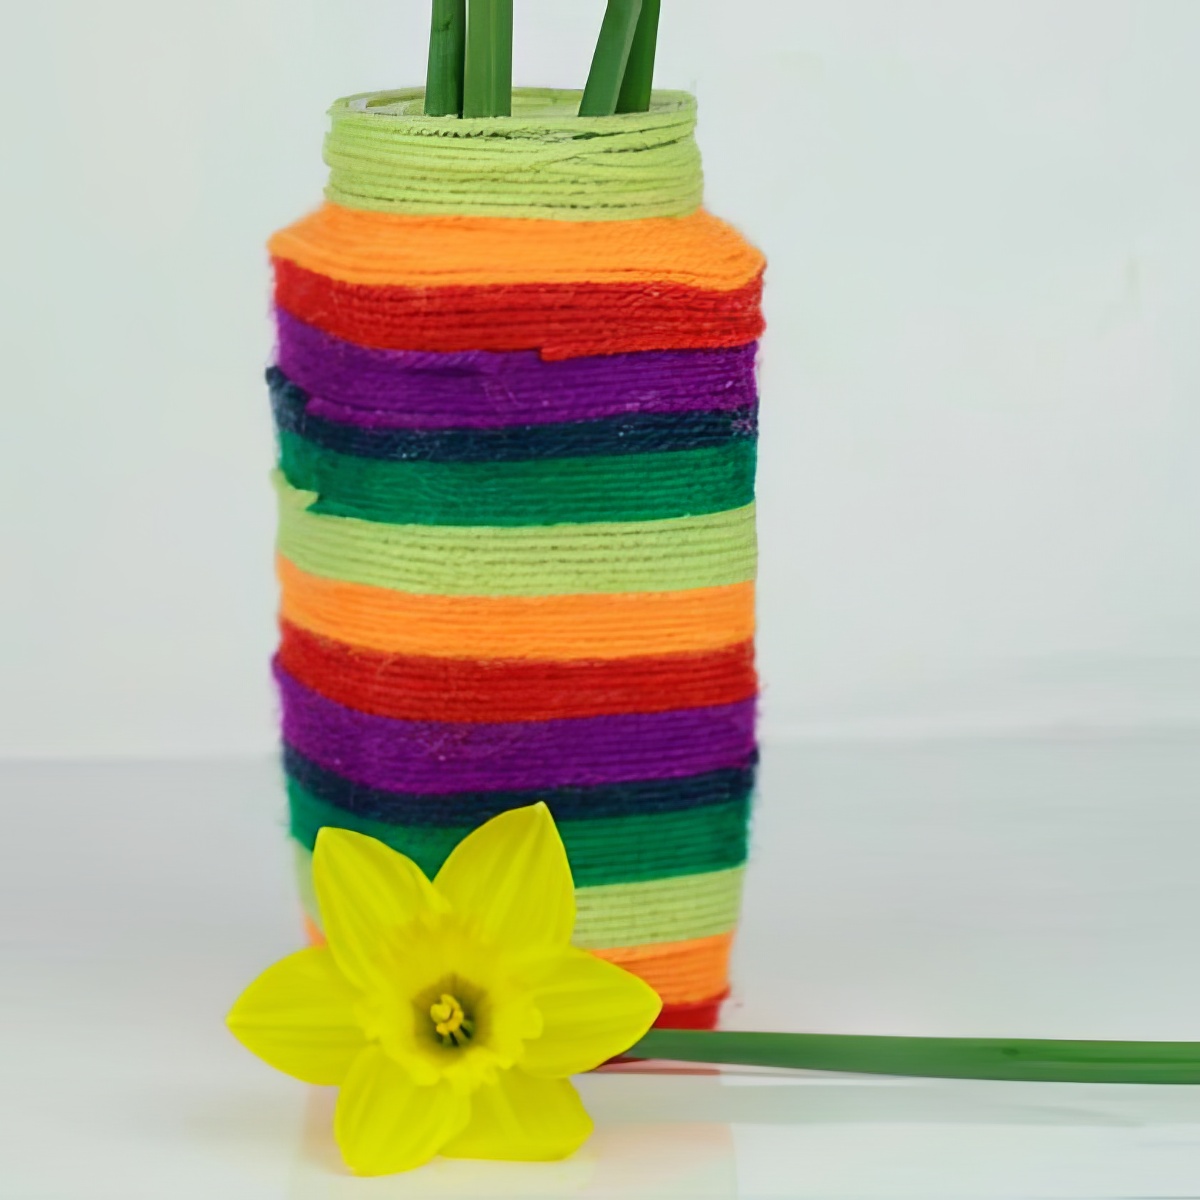 wool vase colorful yarns crafted into a vase by kids